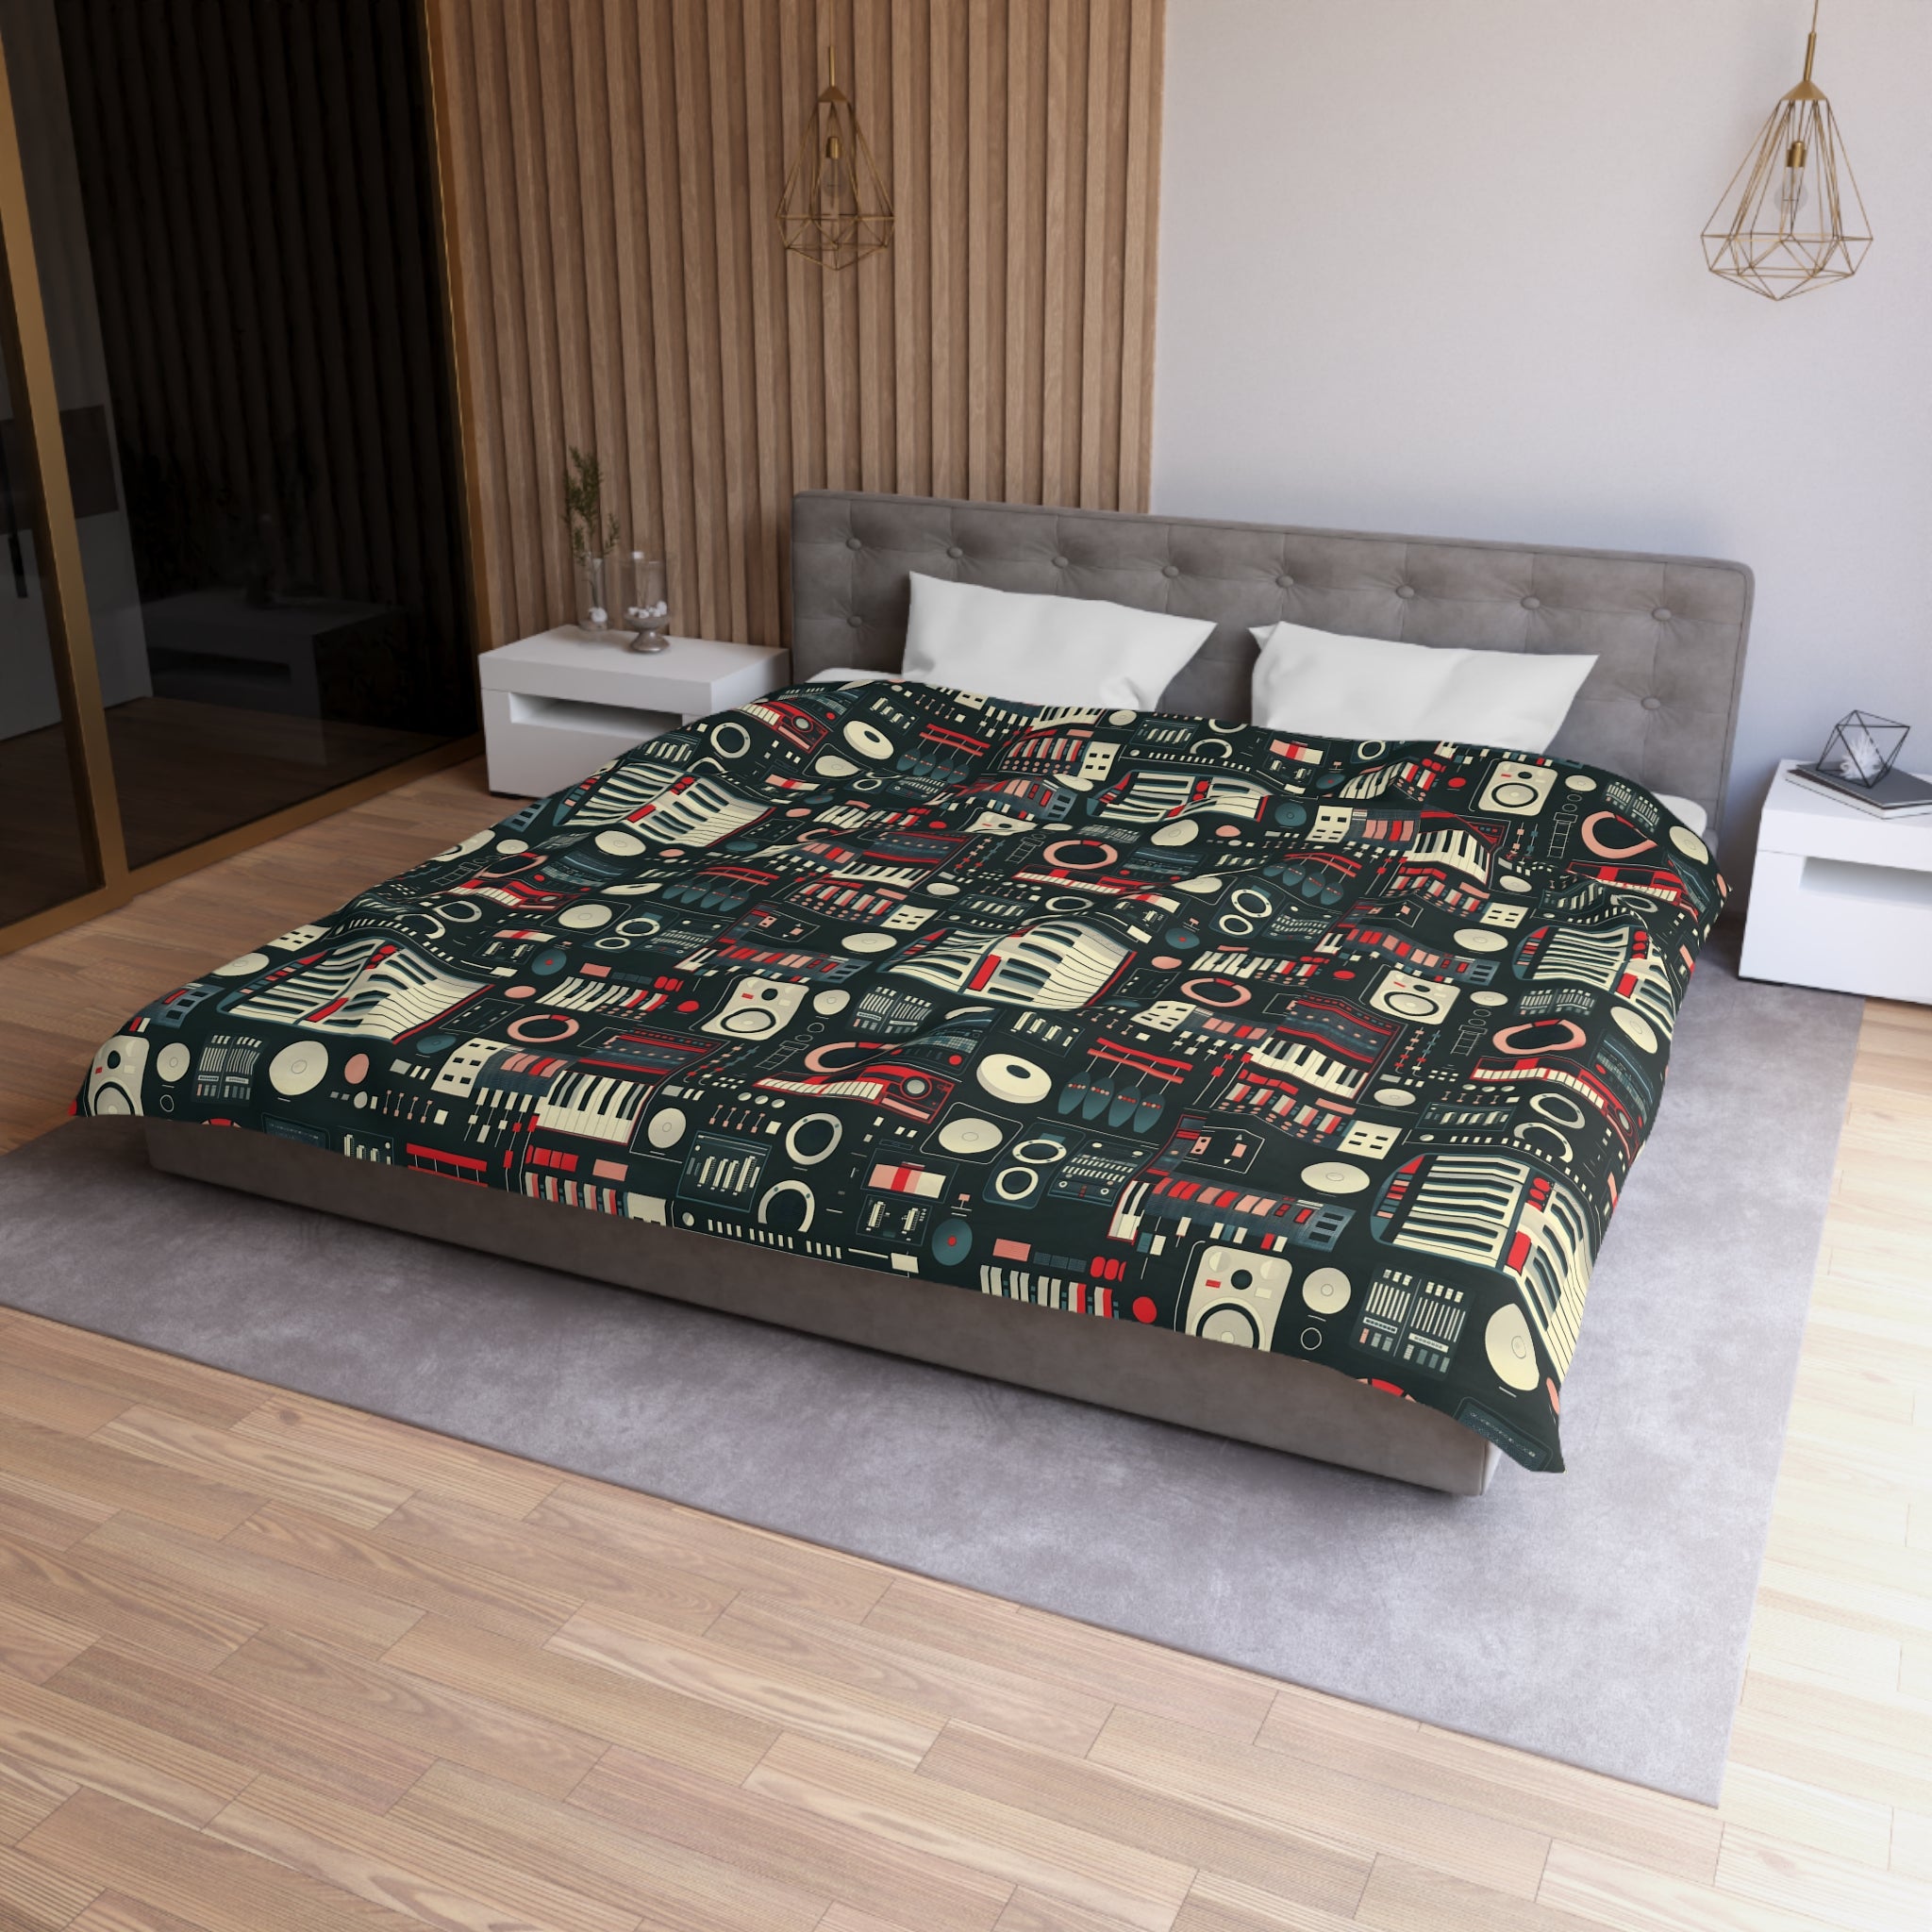 A modern bedroom featuring a bed with a music-themed comforter patterned with colorful motifs of synthesizers and audio equipment, blending comfort with a love for music production.